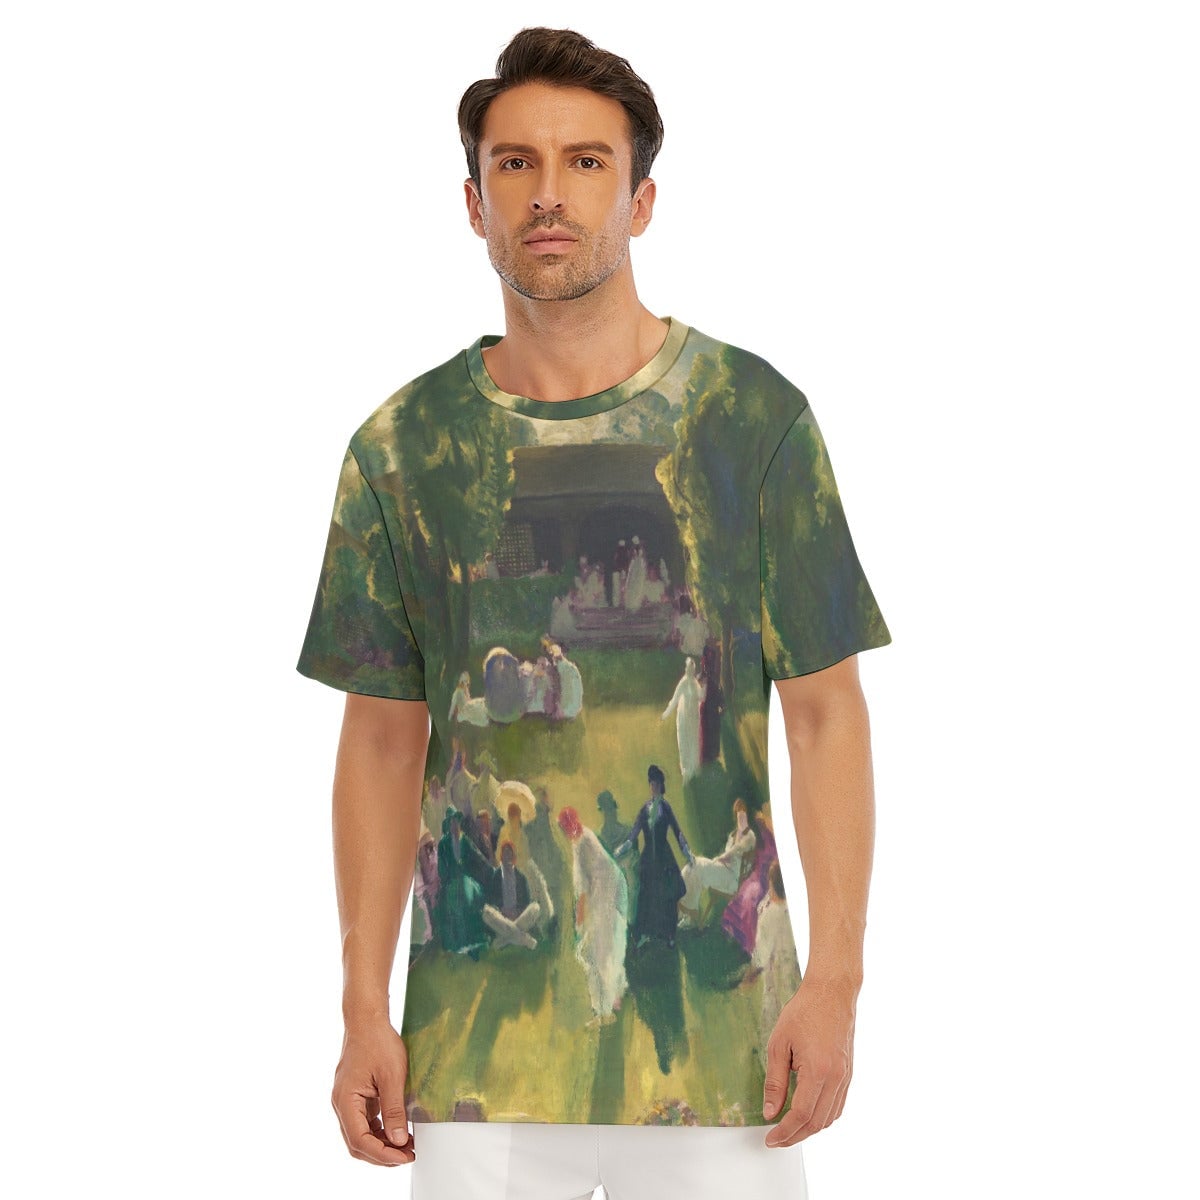 Tennis at Newport by George Bellows T-Shirt - Artistic Tee